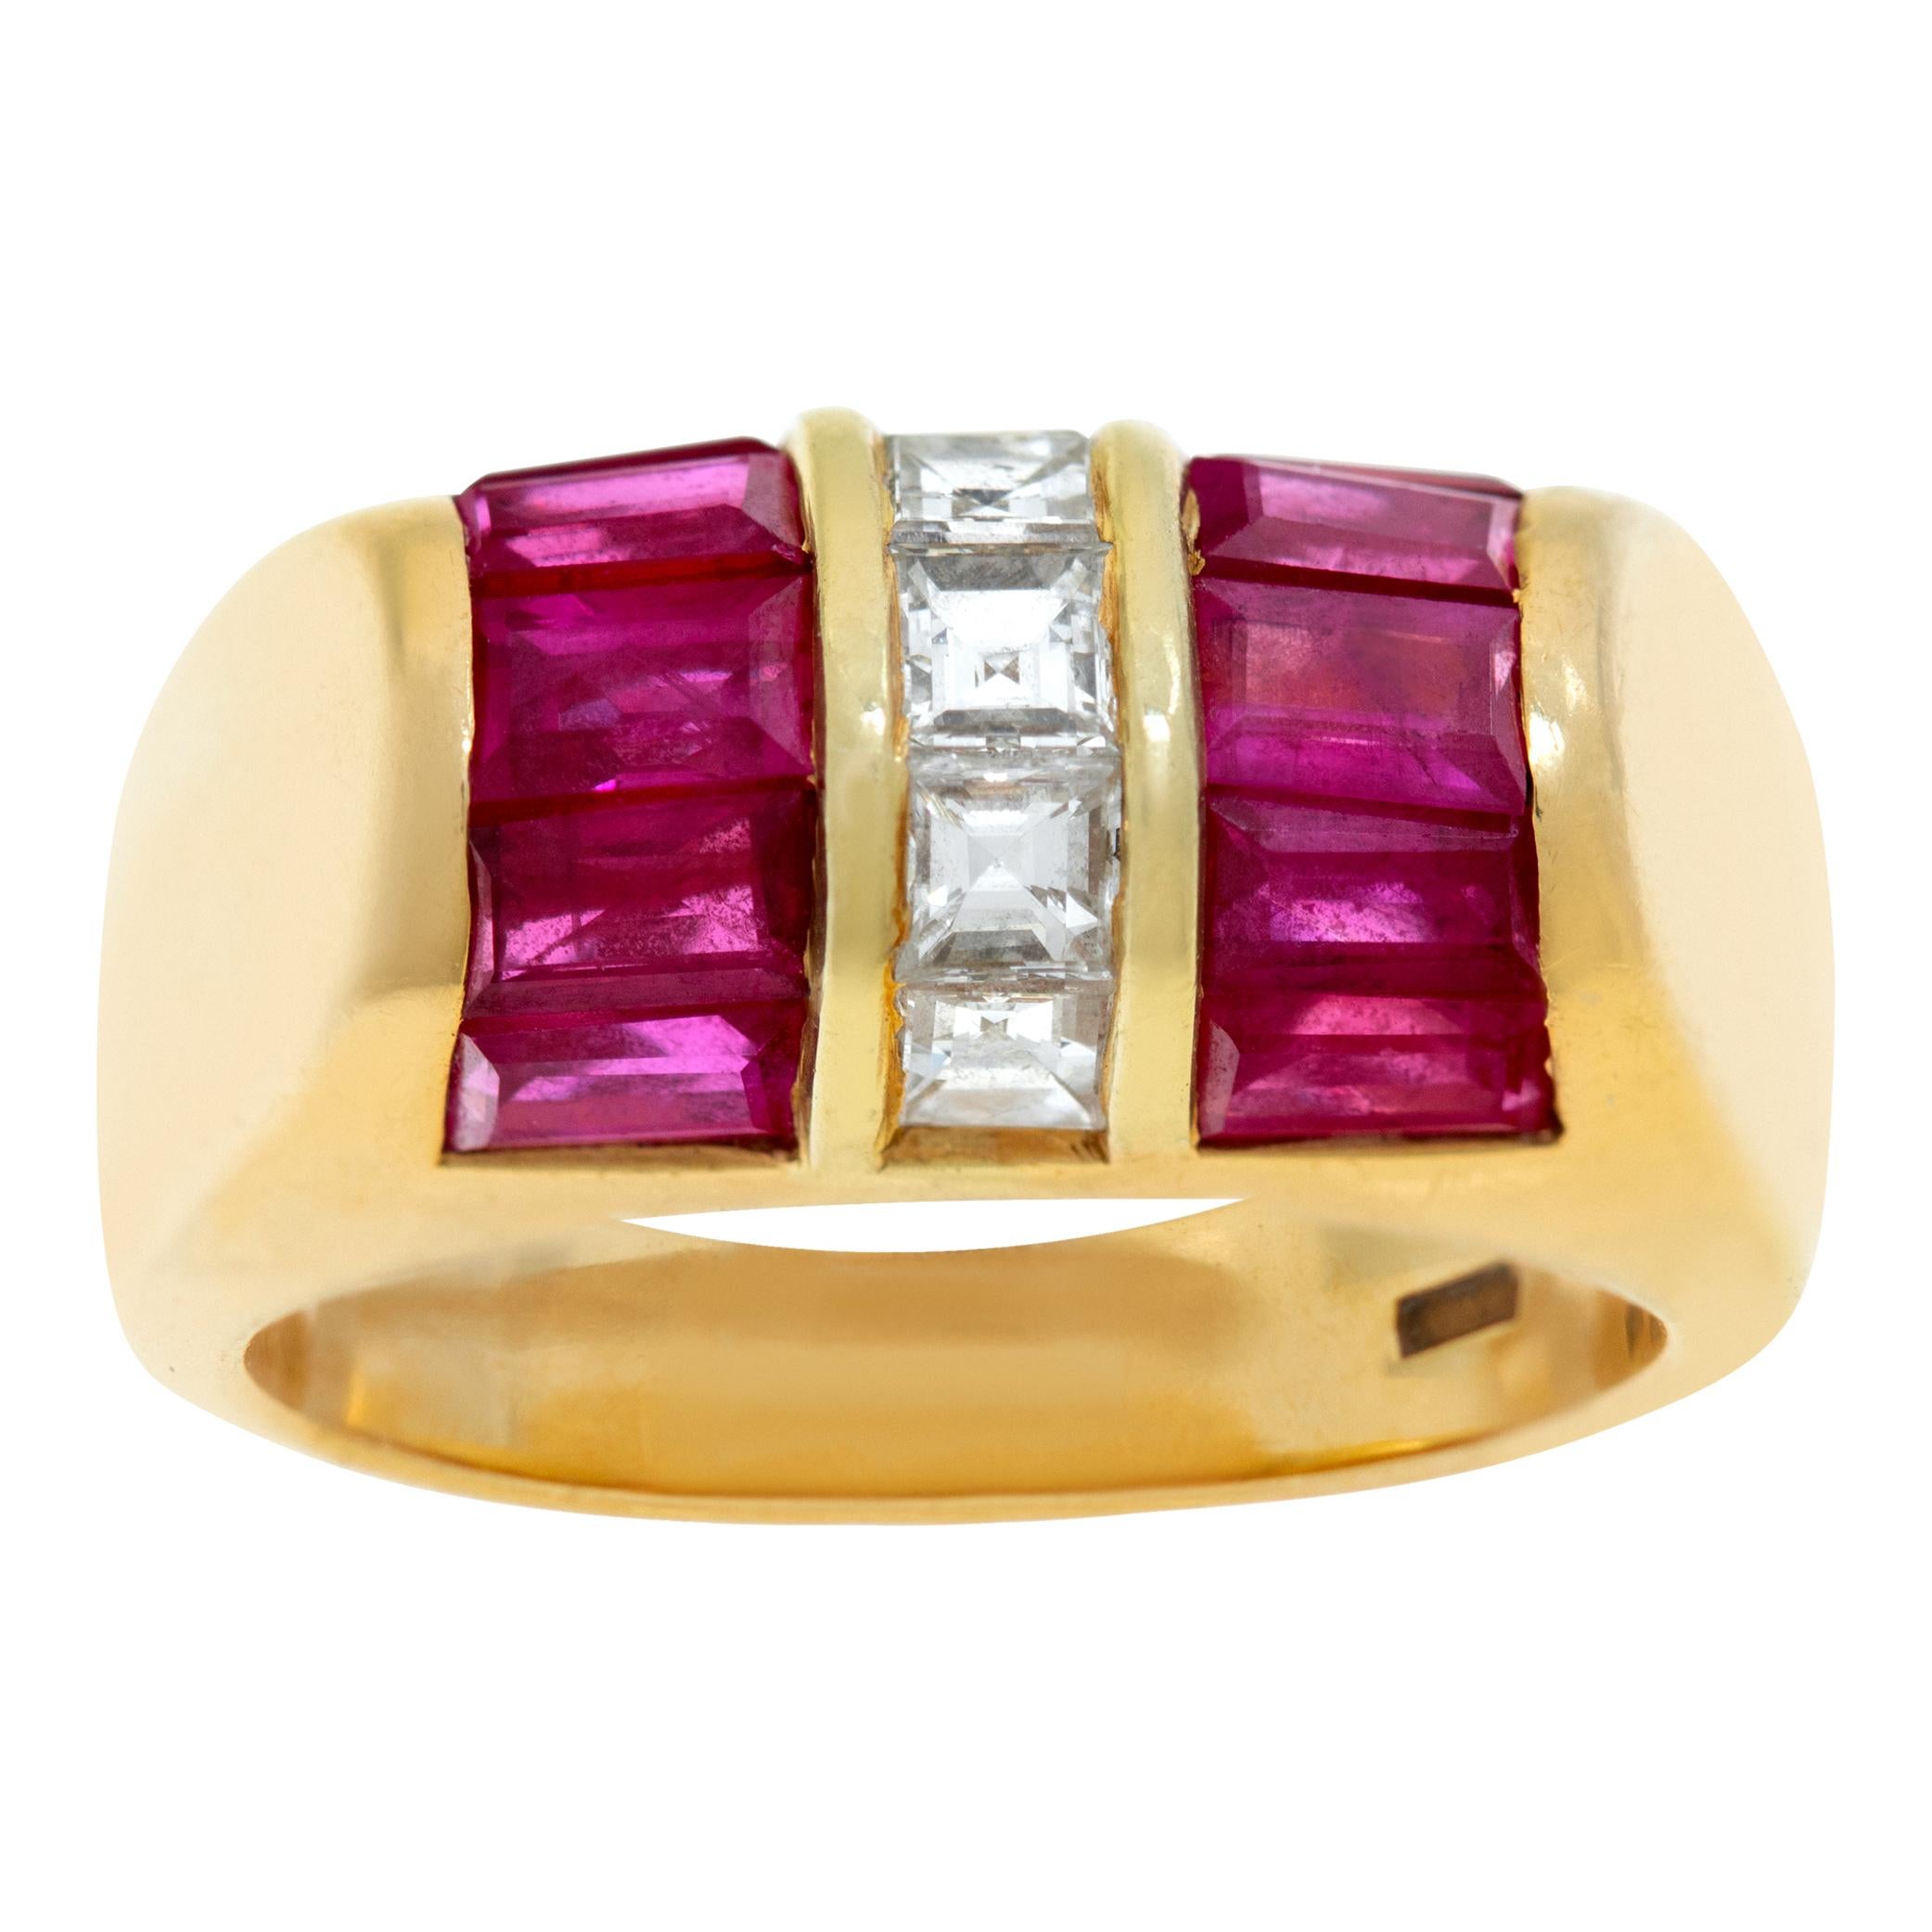 Bvlgari vintage emerald cut diamonds & baguettes rubies ring in yellow gold. For Sale